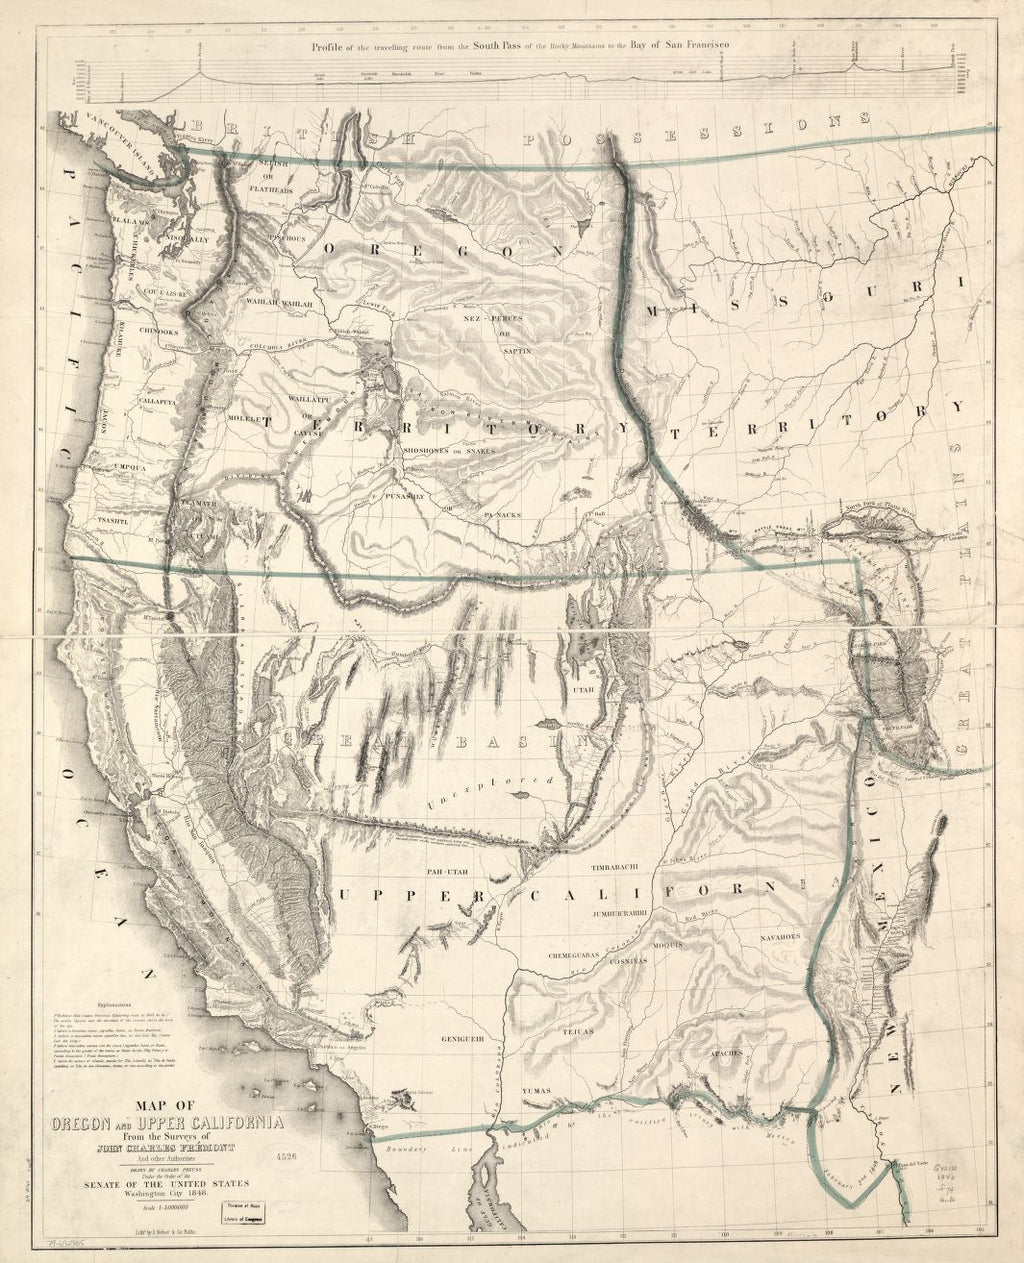 Educational Map Series: John Charles Frémont's Map of Oregon and upper California 1845-1846